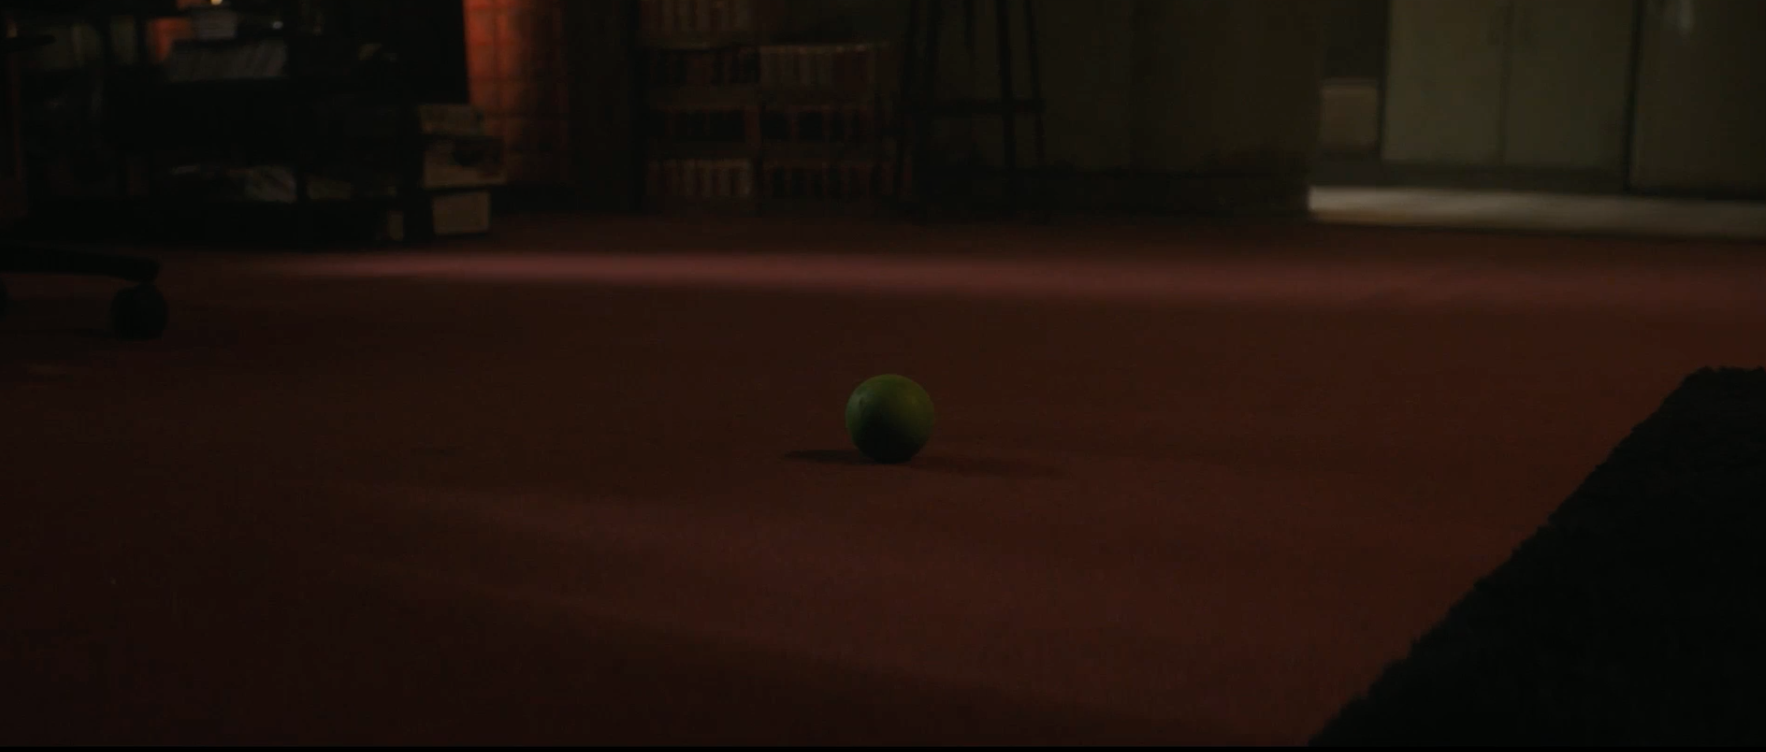 A lone green ball rests on a carpet in a dimly lit room